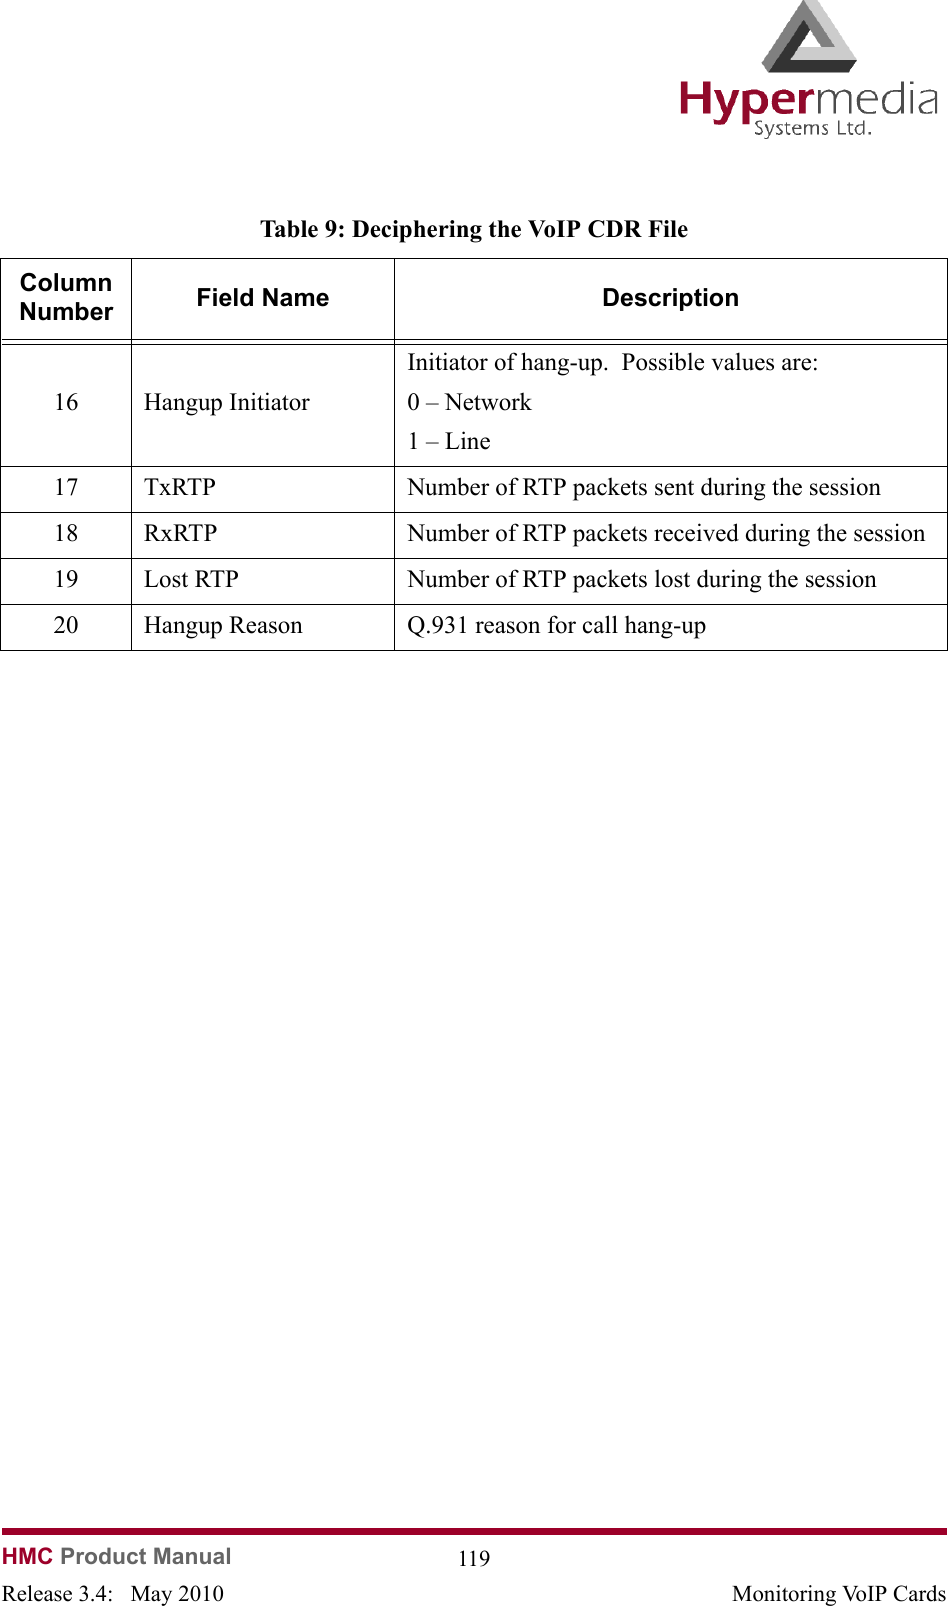 HMC Product Manual  119Release 3.4:   May 2010 Monitoring VoIP Cards16 Hangup InitiatorInitiator of hang-up.  Possible values are:0 – Network1 – Line17 TxRTP Number of RTP packets sent during the session18 RxRTP Number of RTP packets received during the session19 Lost RTP Number of RTP packets lost during the session20 Hangup Reason Q.931 reason for call hang-upTable 9: Deciphering the VoIP CDR FileColumn Number Field Name Description